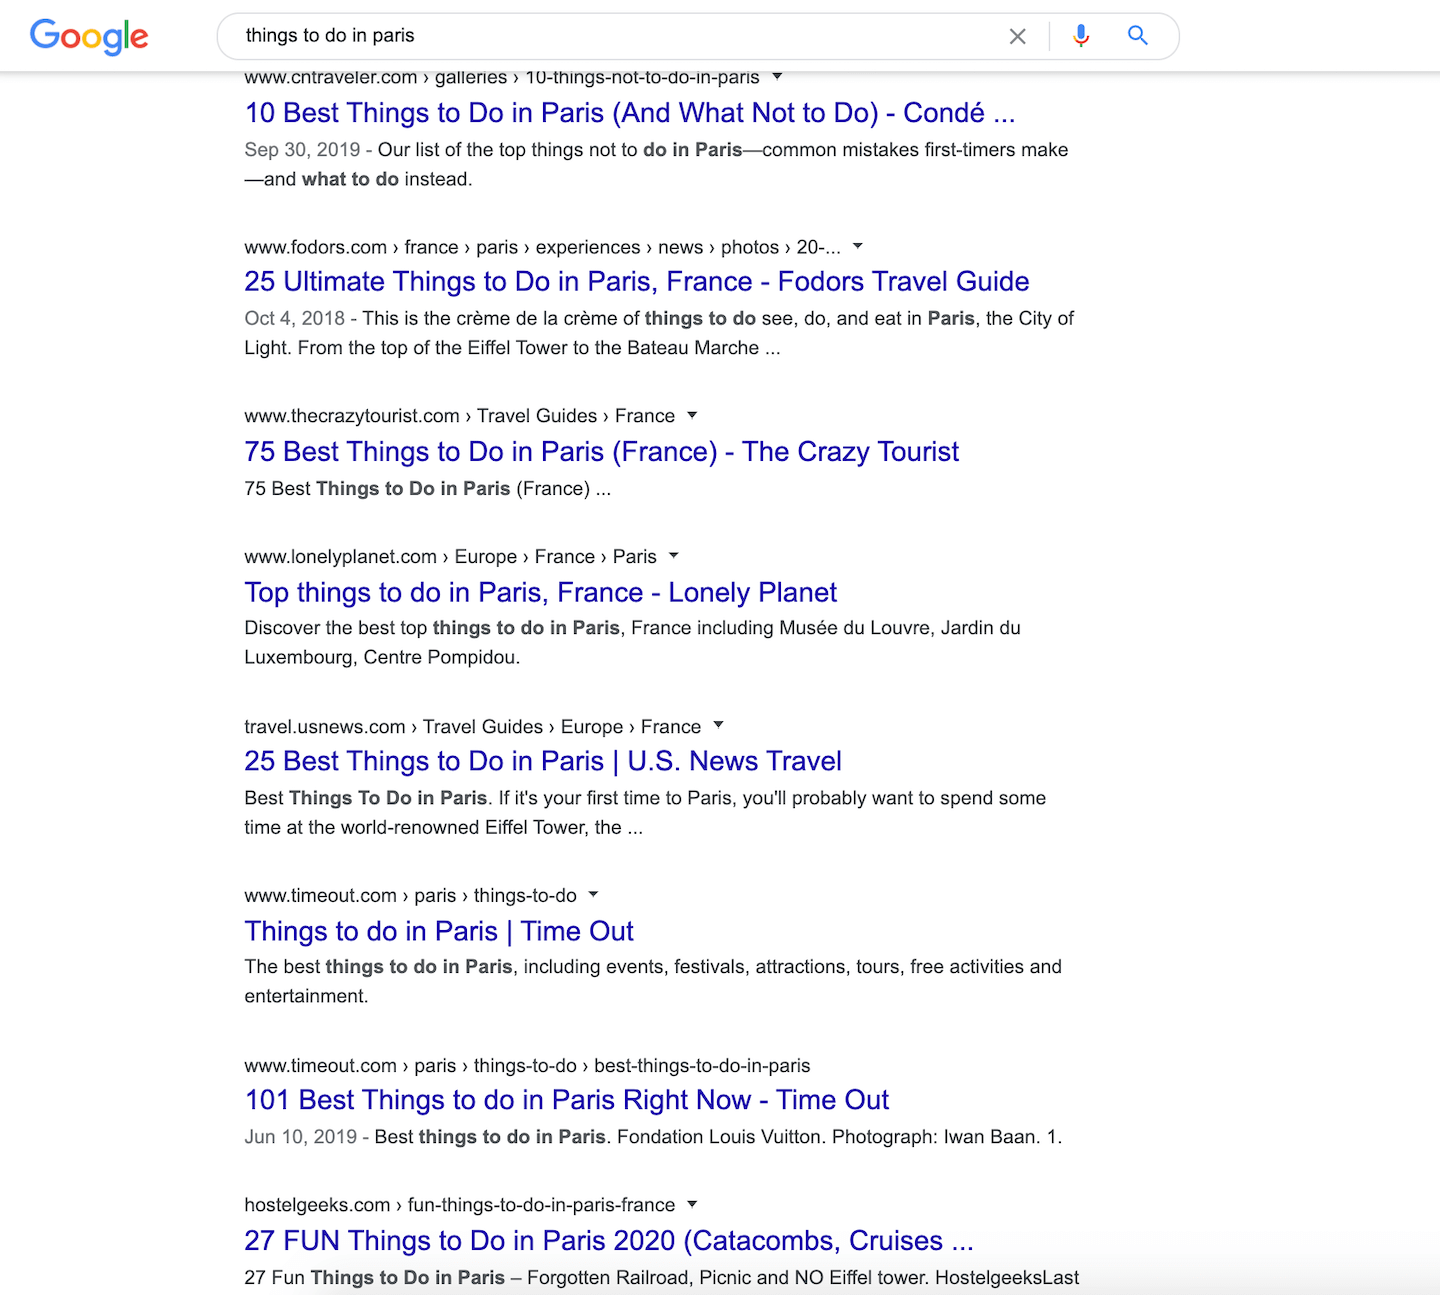 Google search showing top results for "things to do in Paris"